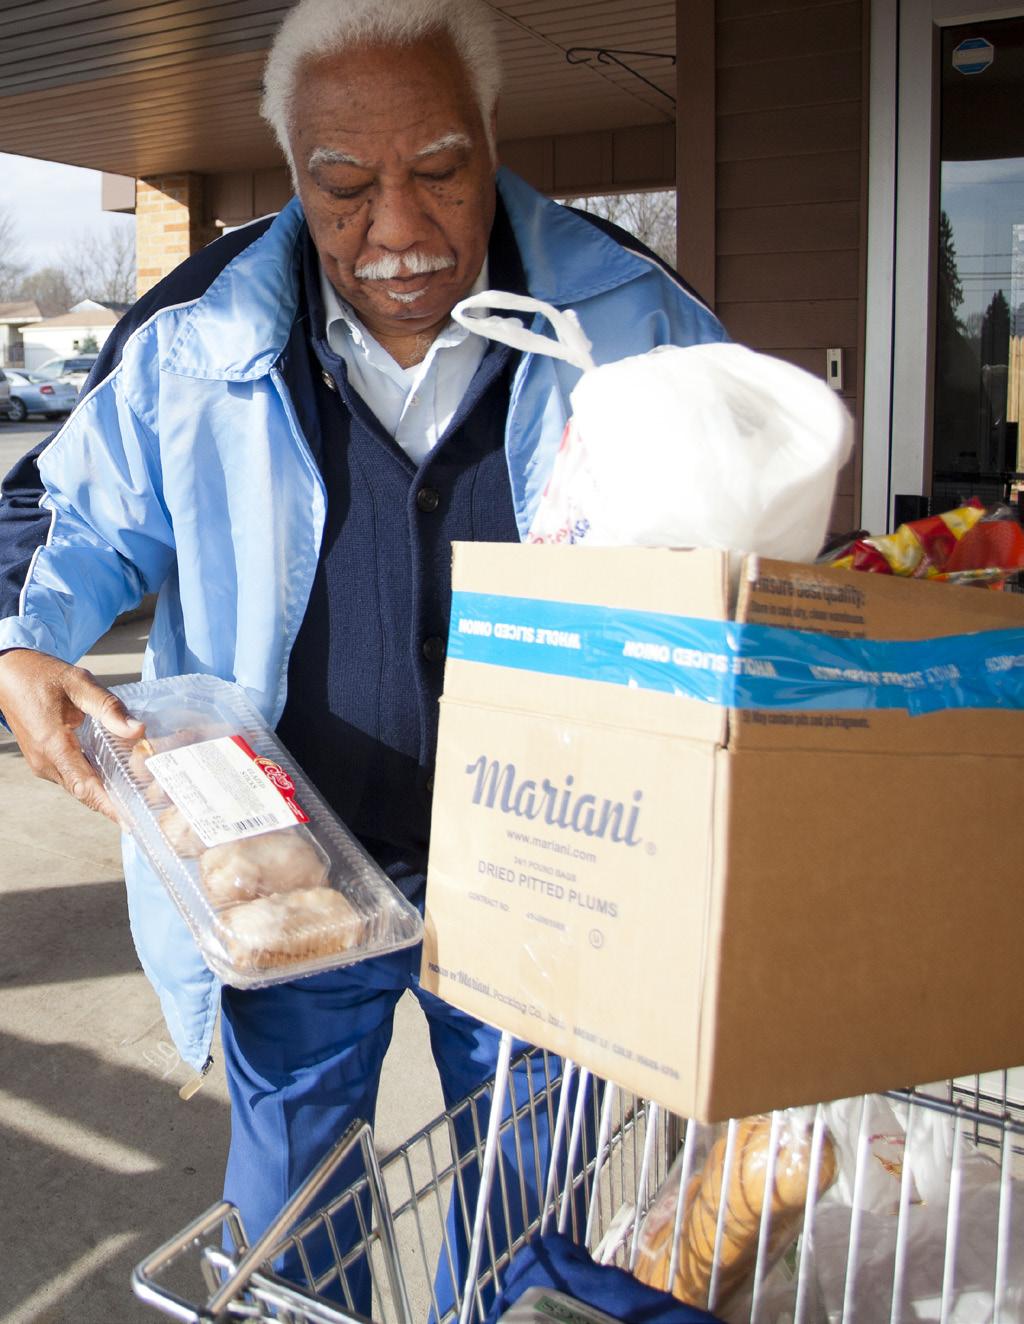 POTENTIAL IMPLICATIONS This report highlights the high rate of food insecurity among the senior population and its clear association with poor health and nutrition among older individuals.